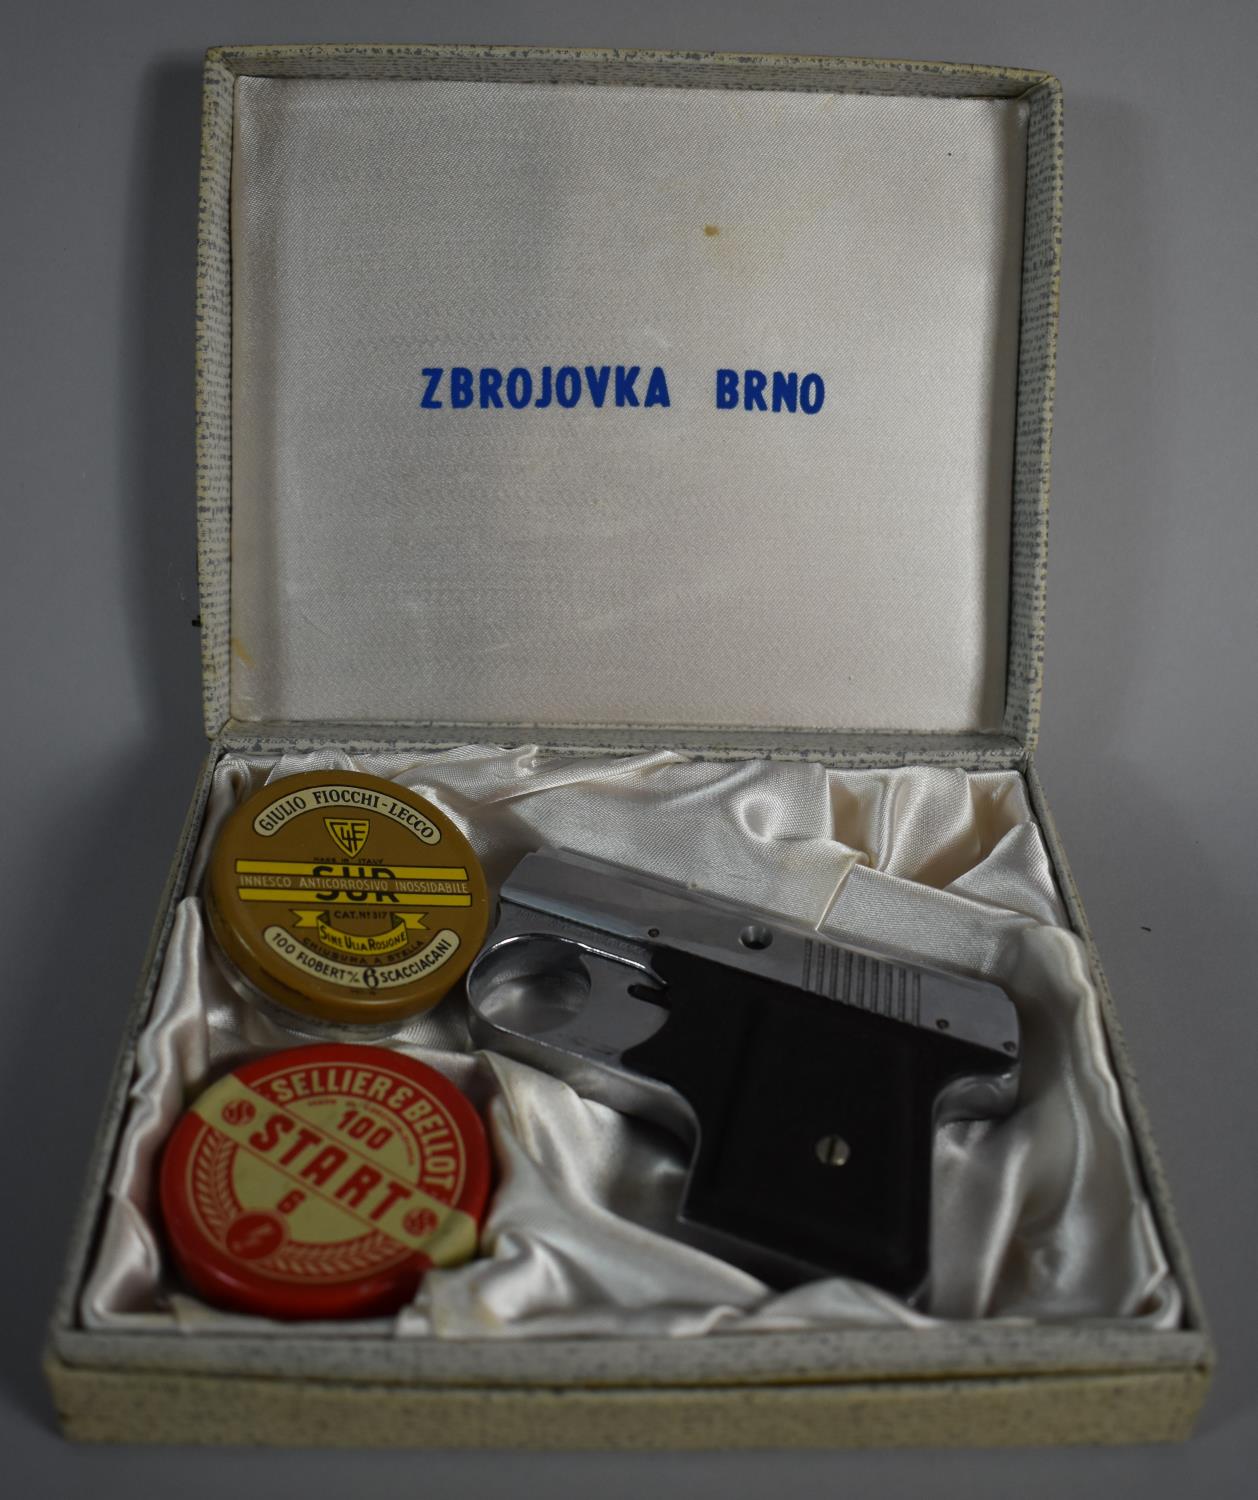 A Vintage Starting Pistol Made in Czechoslovakia, Complete with Blanks